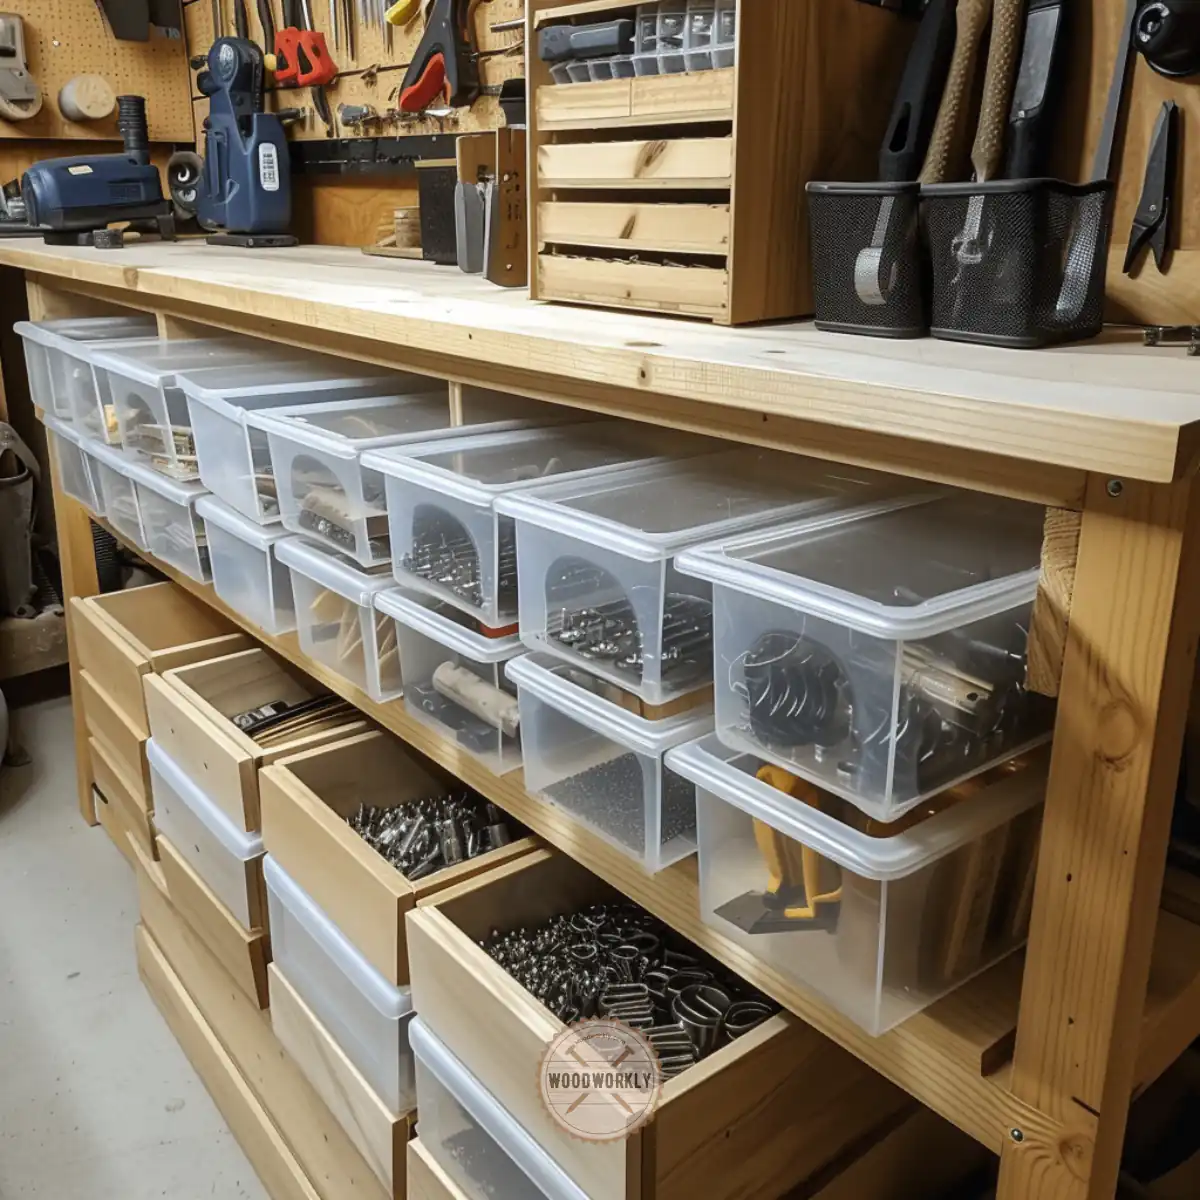 Clear Storage Bins for Small Parts